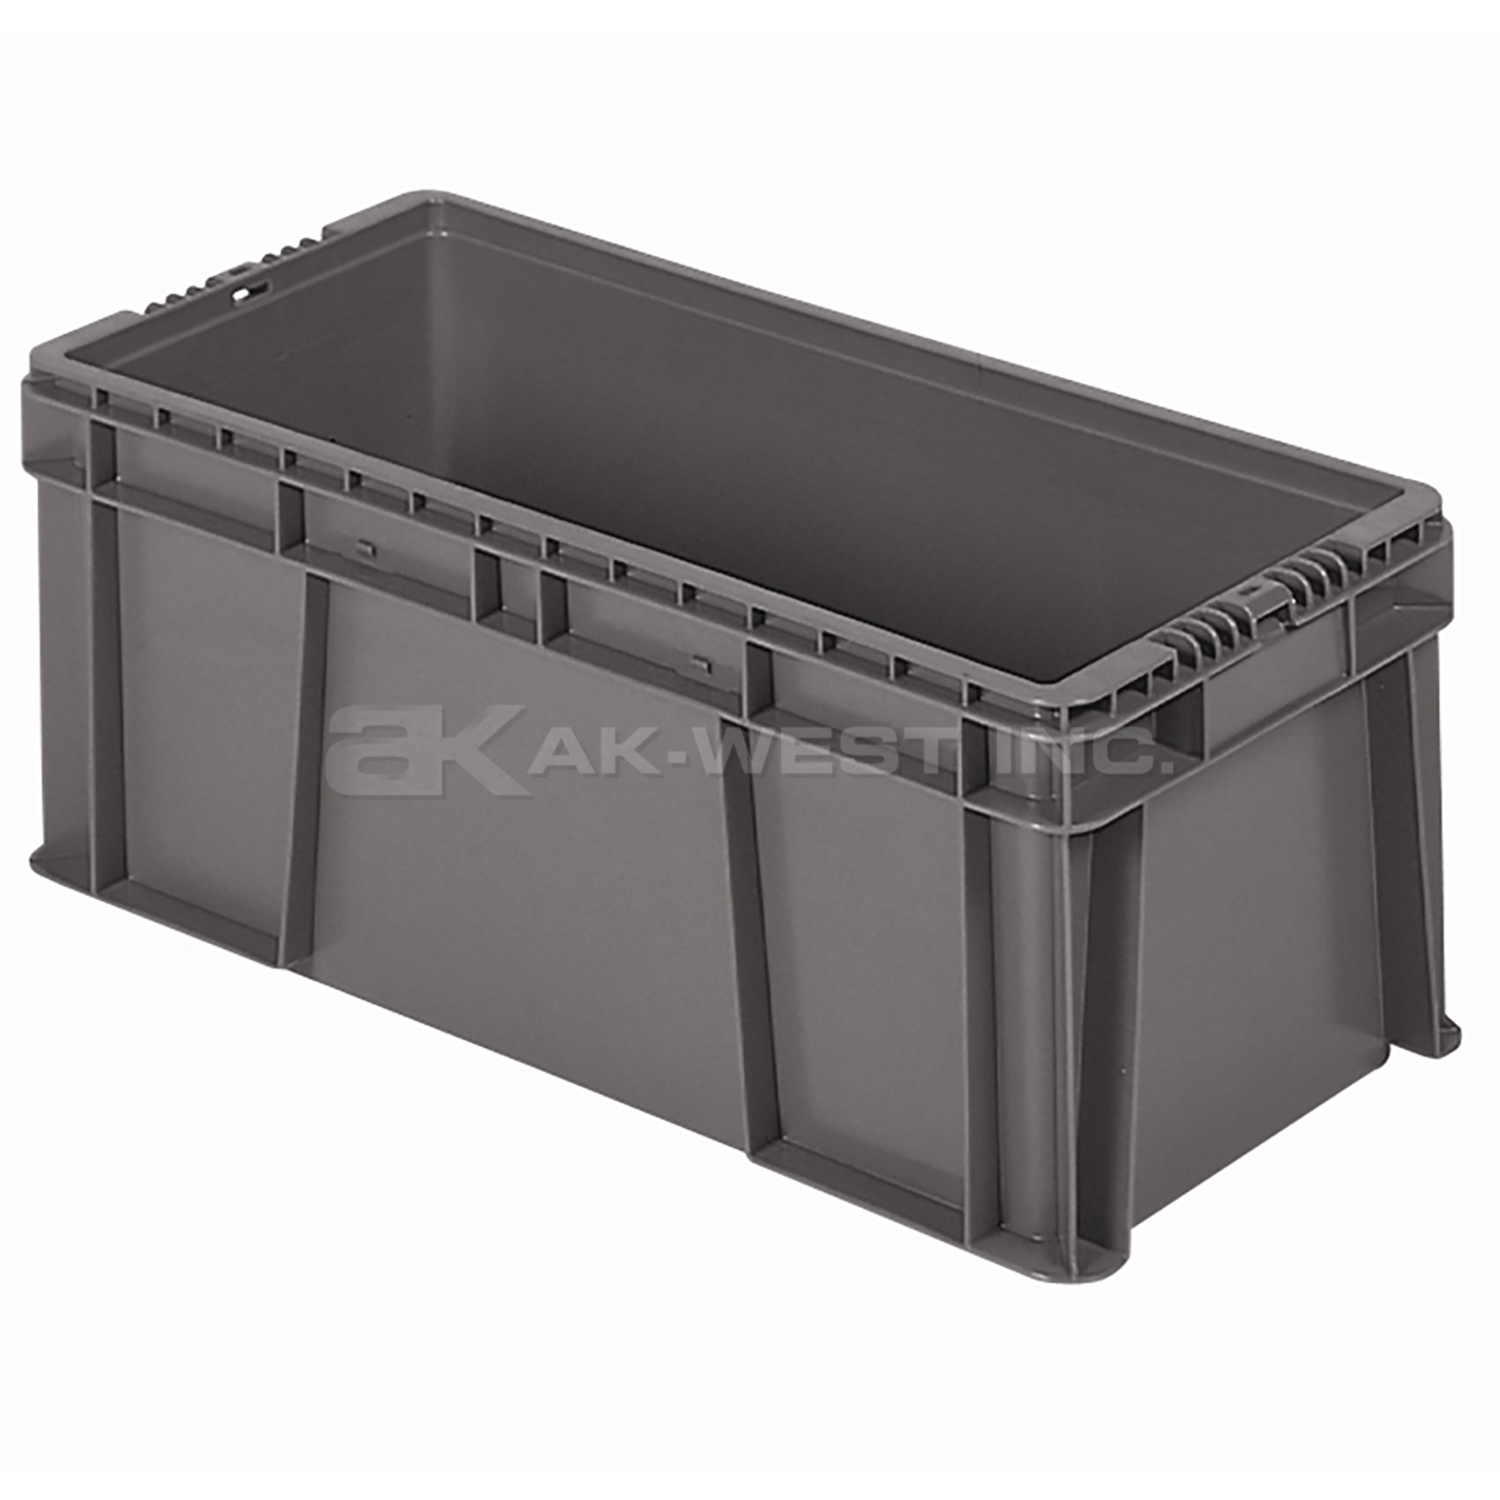 Grey, 24" x 15" x 11", Straight Wall Container